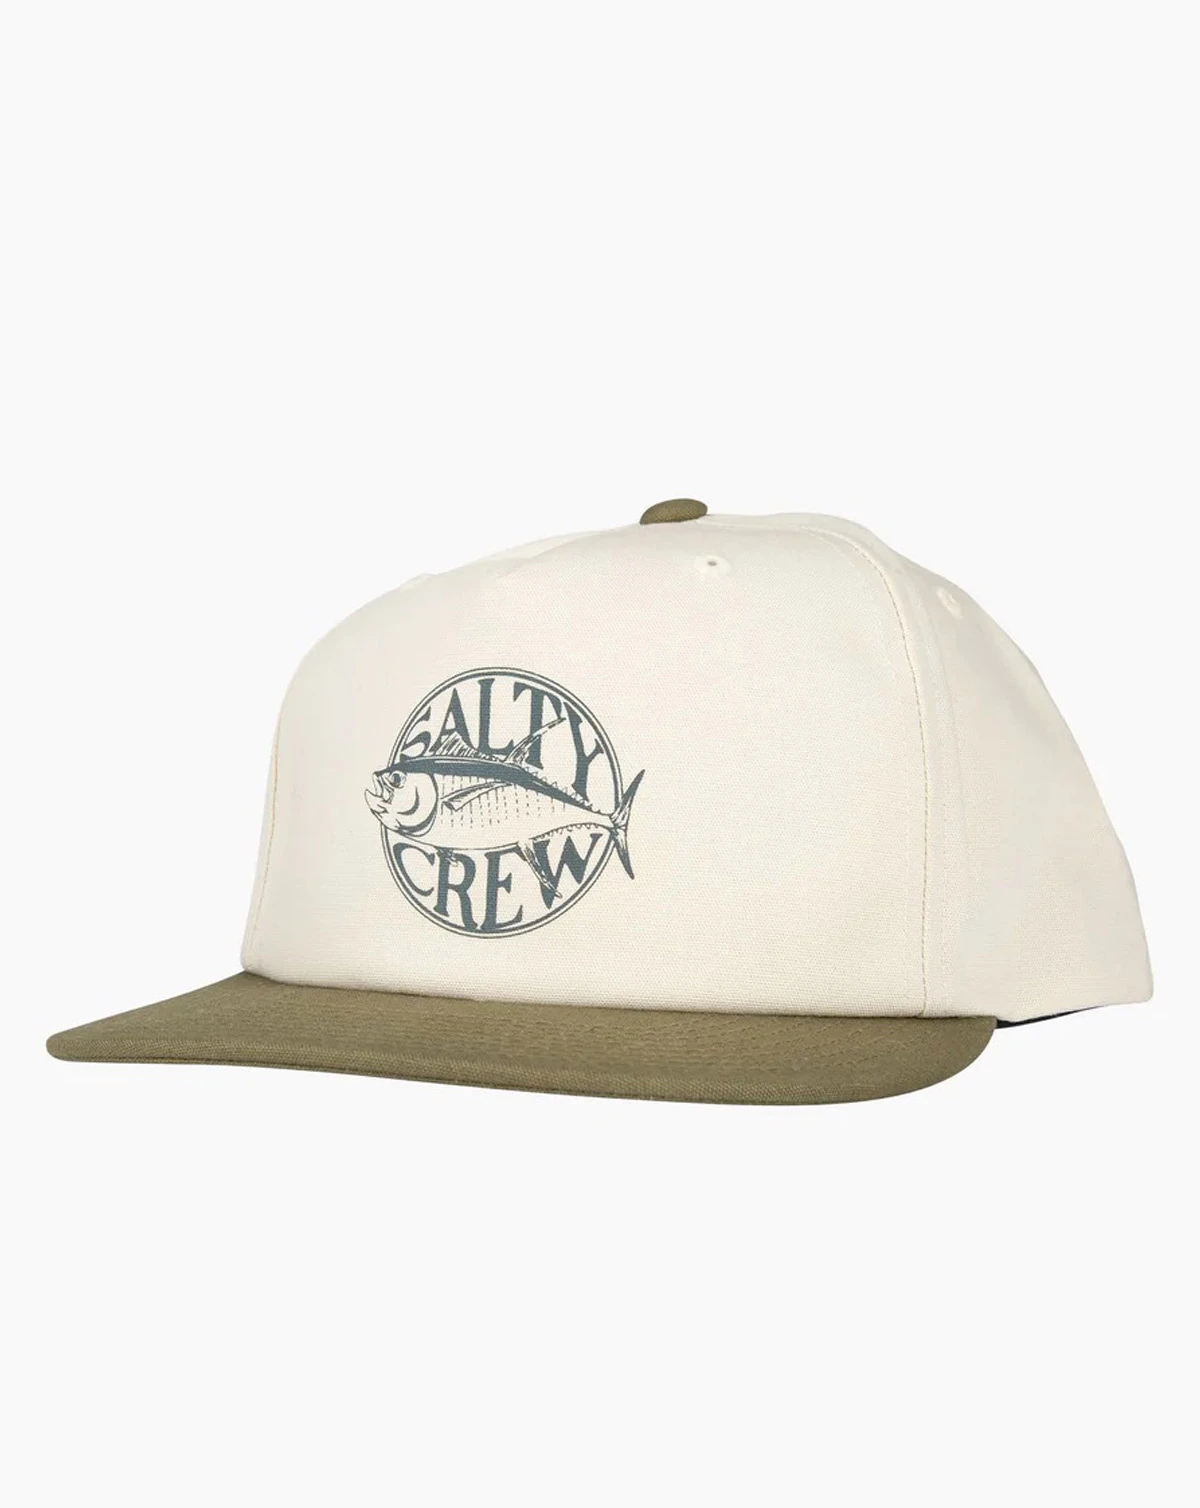 & Army military caps online Army Star | Army Buy – caps